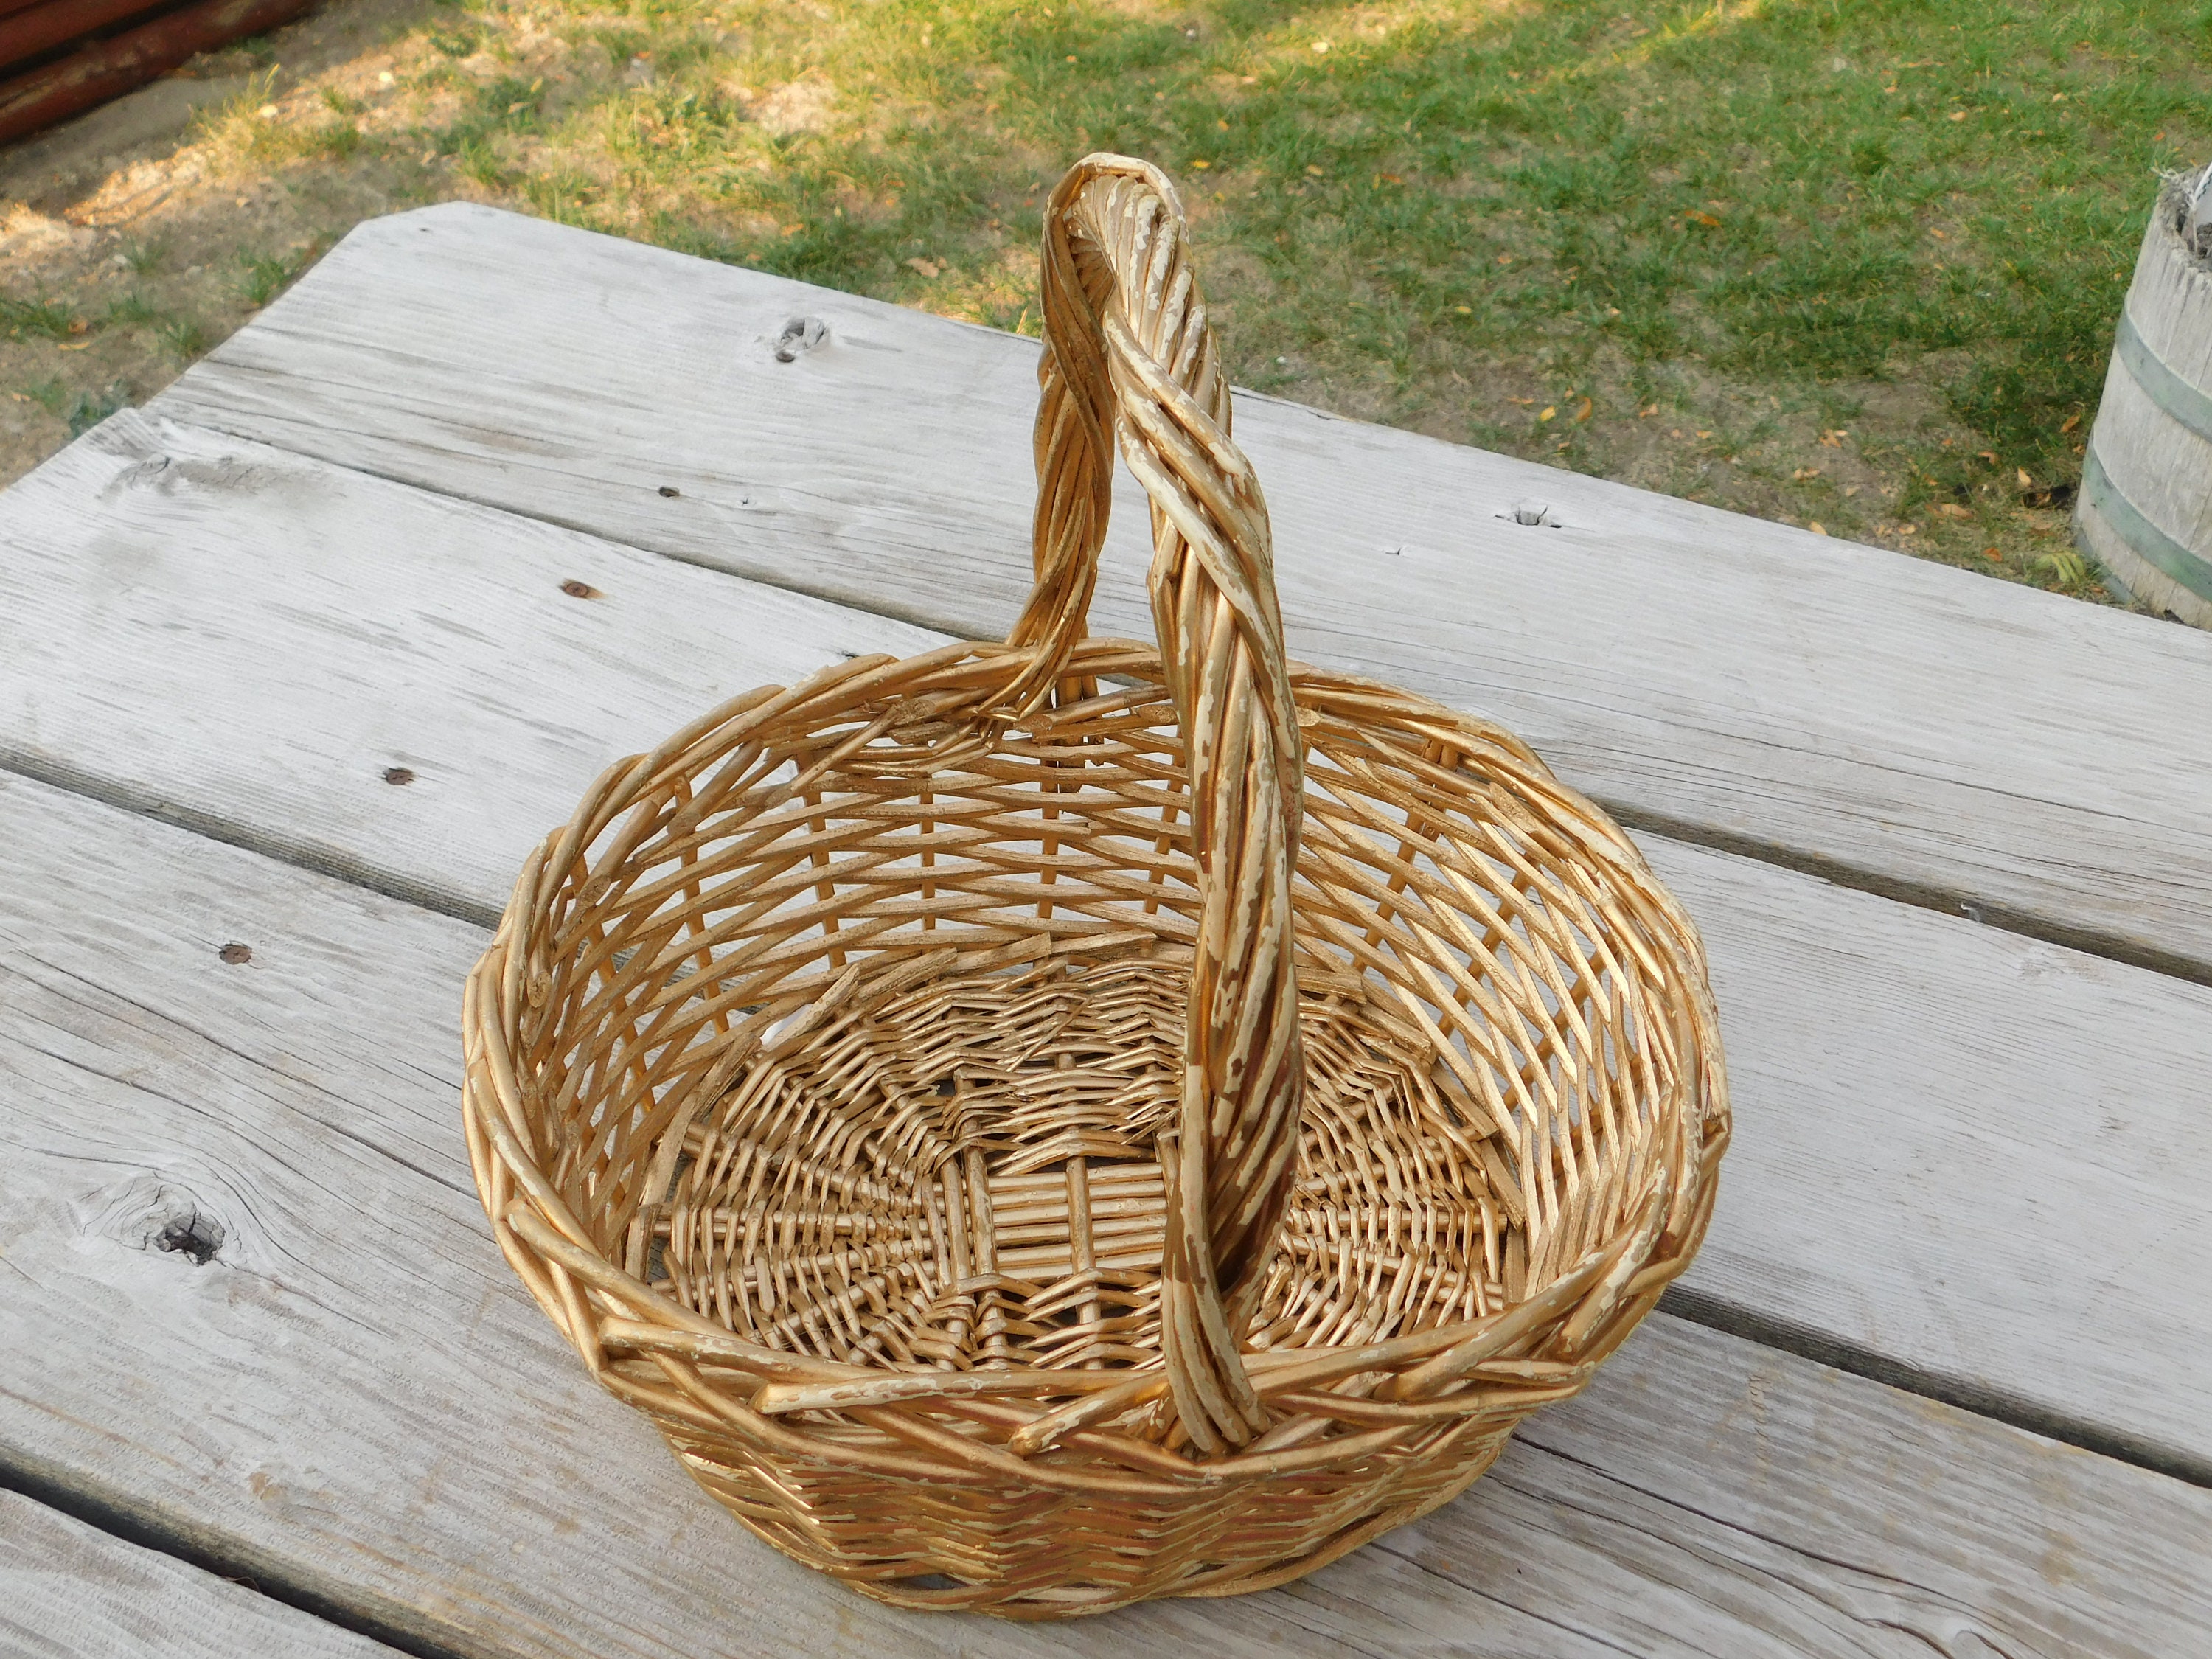 LOOKAT Wicker Picnic Basket，Storage Baskets with Folding Handles & Liners， Storage of Easter Eggs and Candy ，Kids Toy Storage，Beach Basket Oval-Round Bottom, Brown 